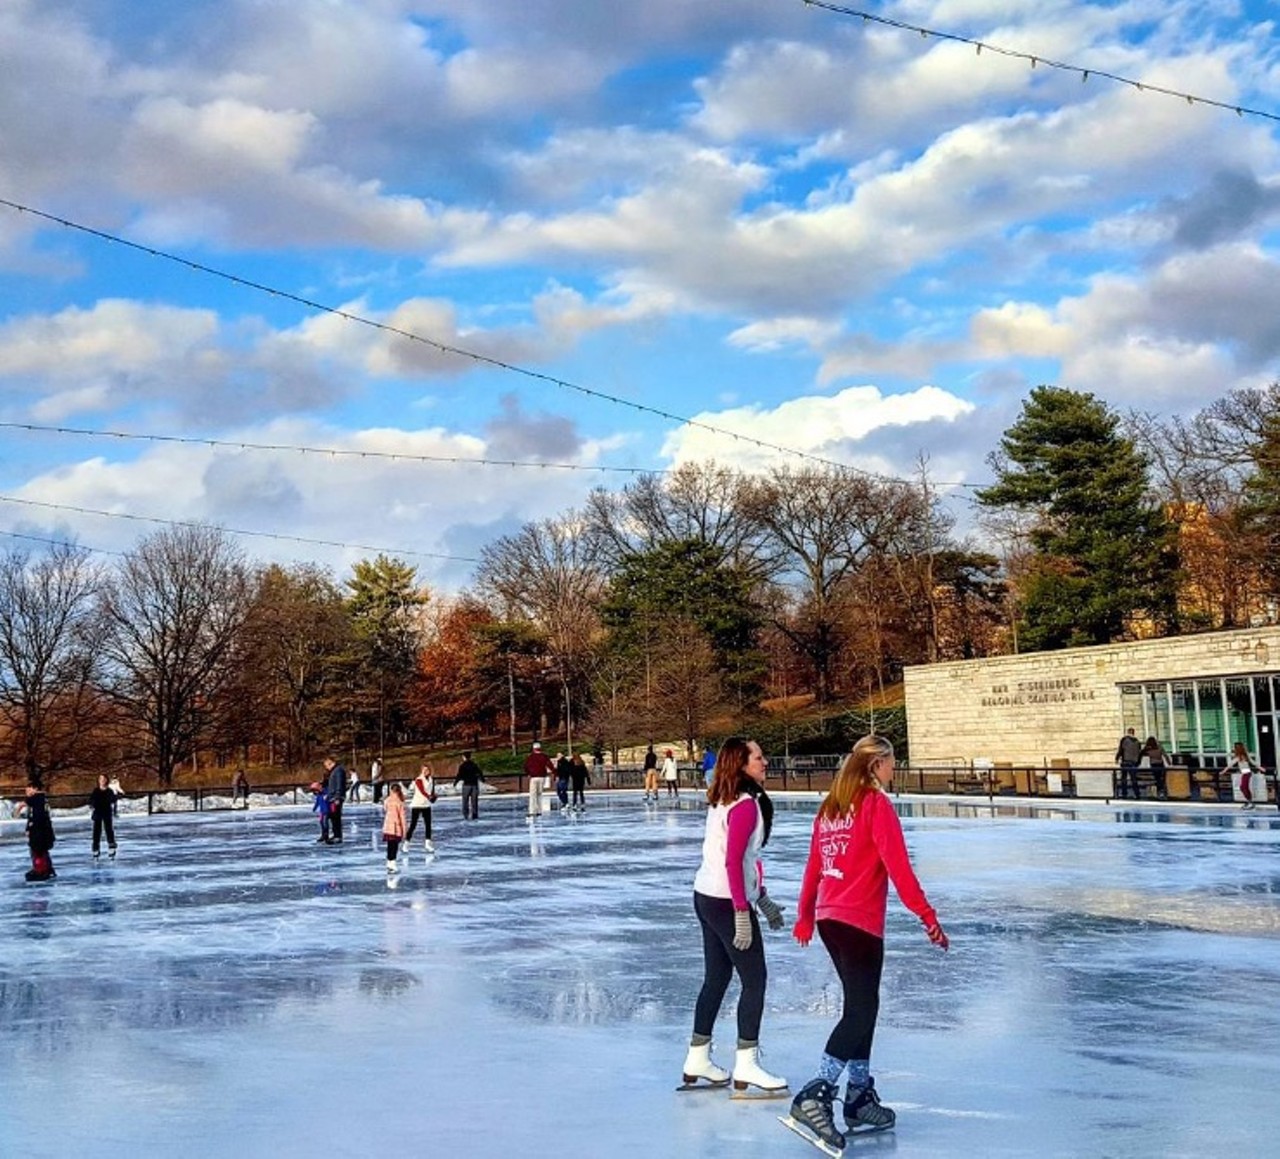 Steinberg Skating Rink
400 Jefferson Drive
St. Louis, MO 63110
(314) 367-7465
Steinberg Skating Rink, located in Forest Park, is a seasonal tradition worth keeping. Known as the largest outdoor ice skating rink in the Midwest, Steinberg is open every day through March 1 (yes, even holidays) and features skating lessons, a fire pit and a cafe. Photo courtesy of Instagram / vikingpunkology.